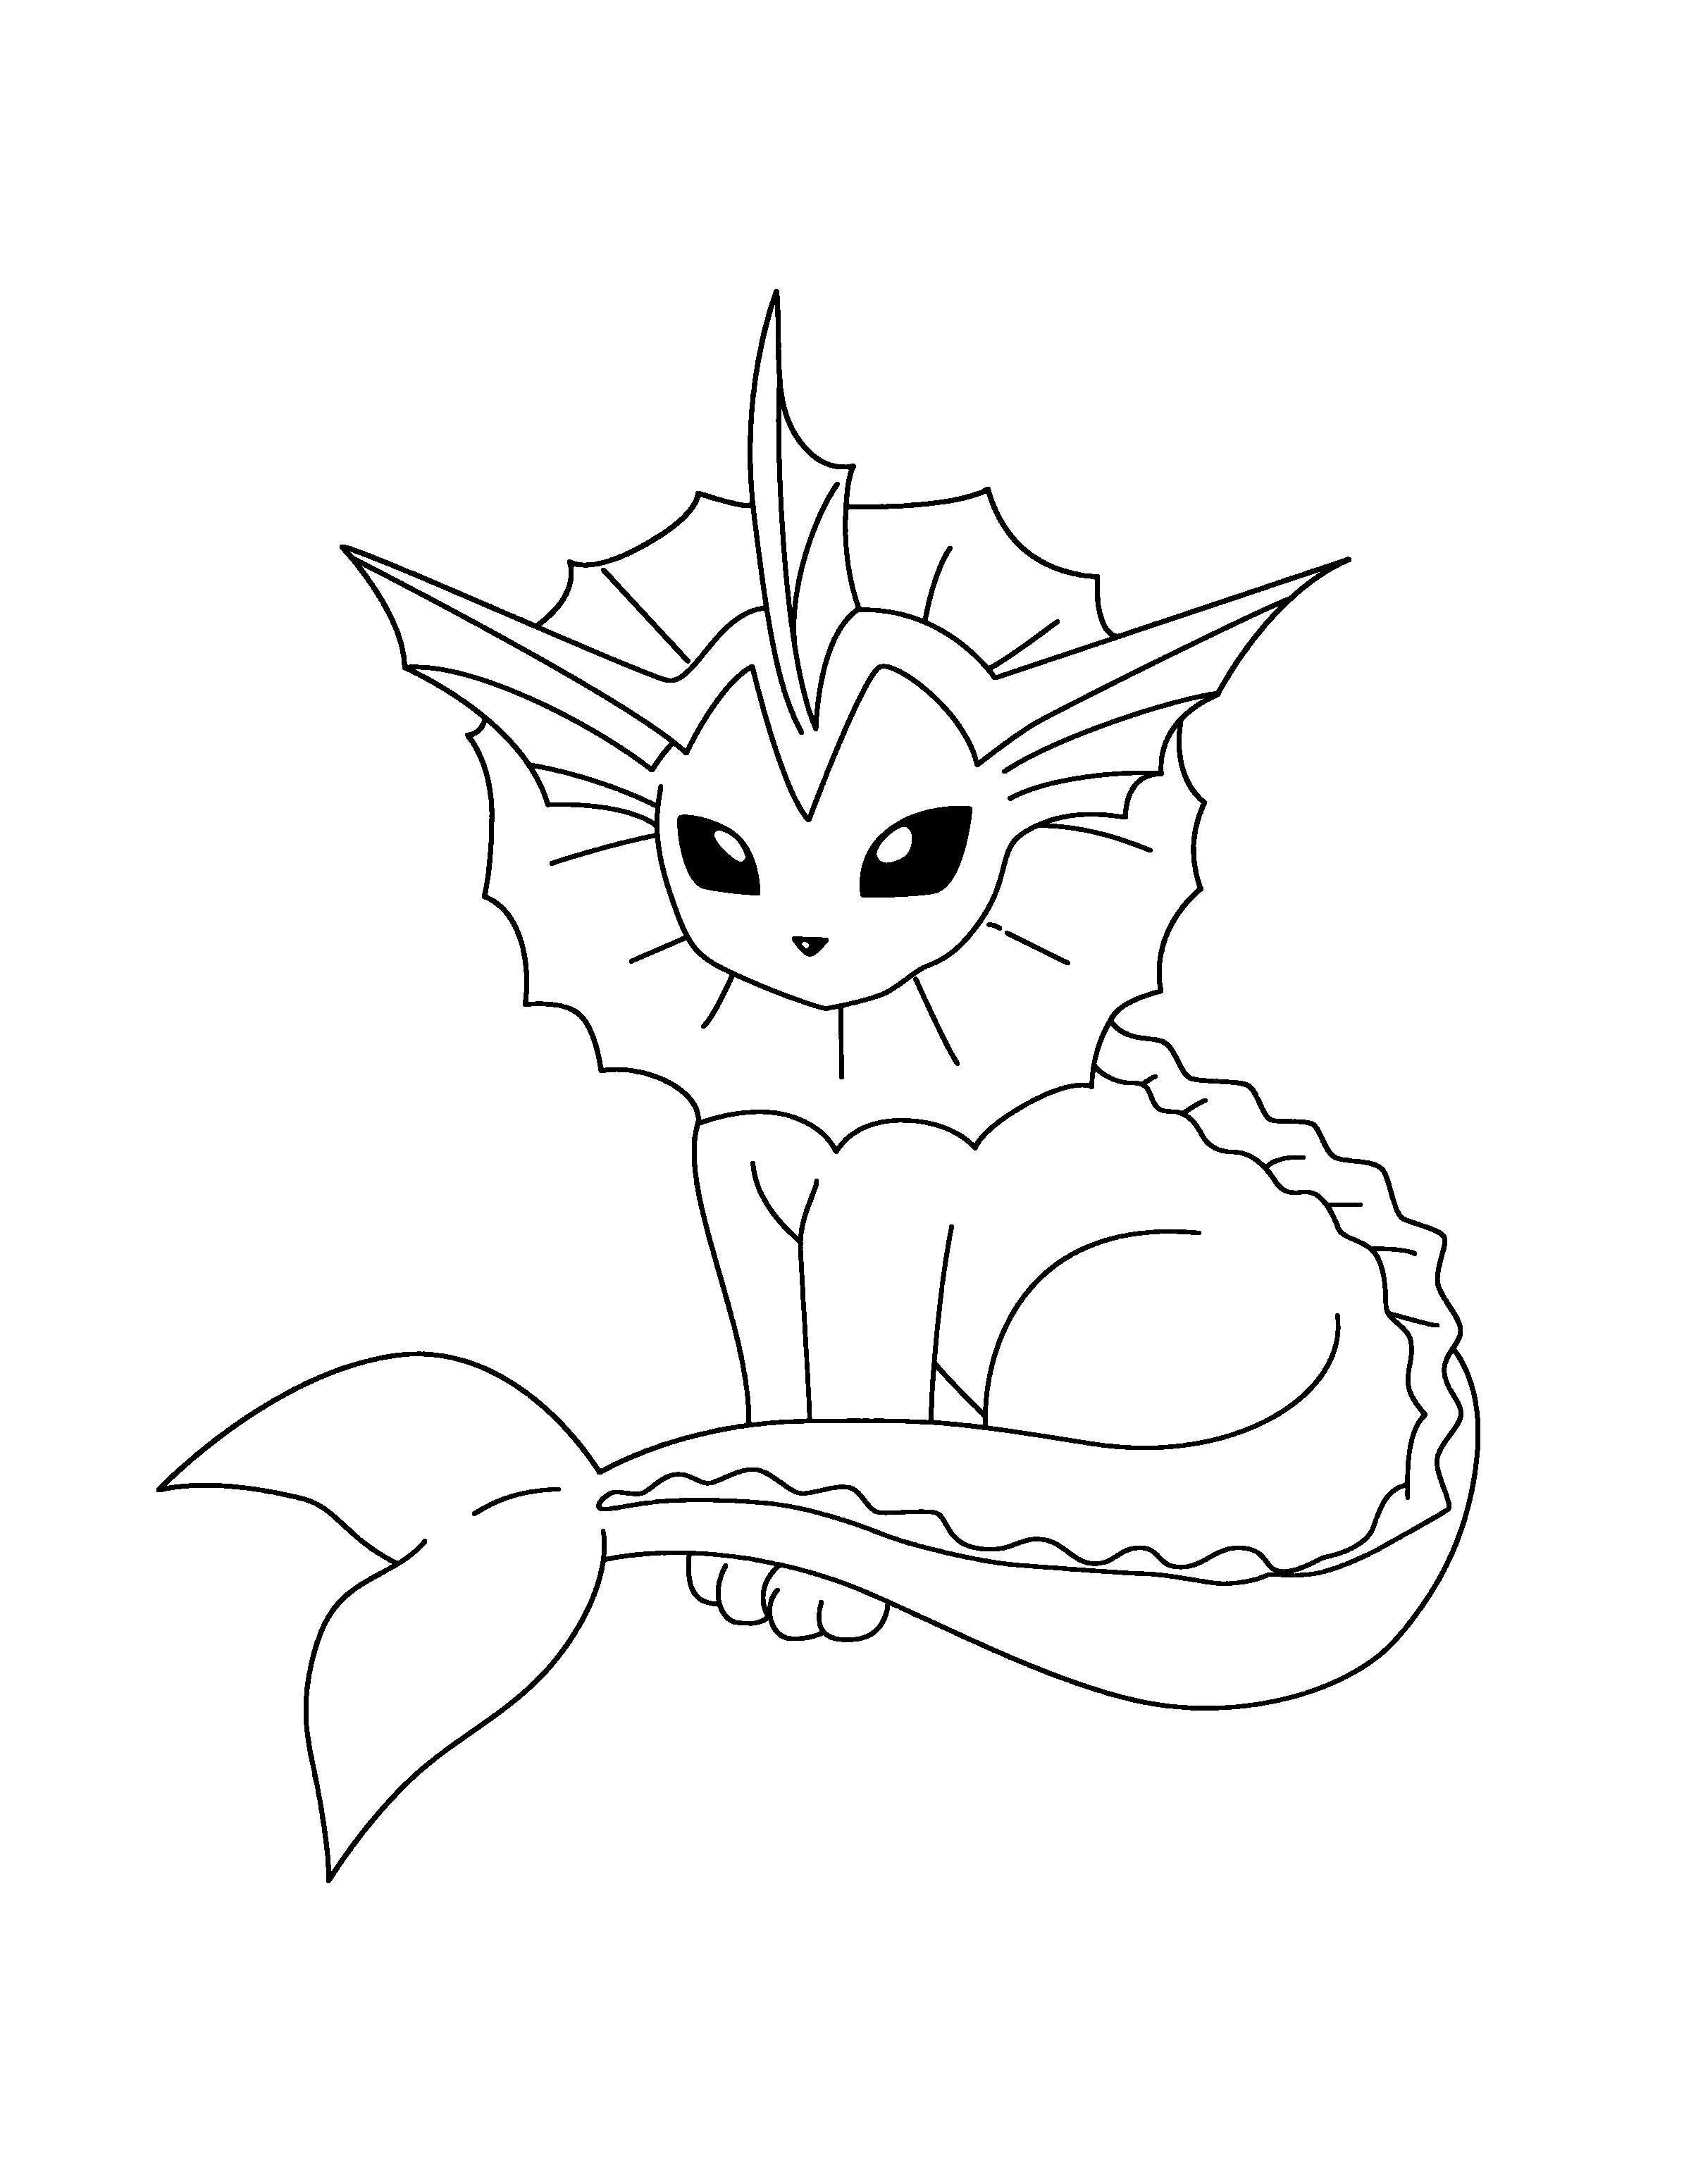 Pokemon Vaporeon Coloring Pages Coloring Home